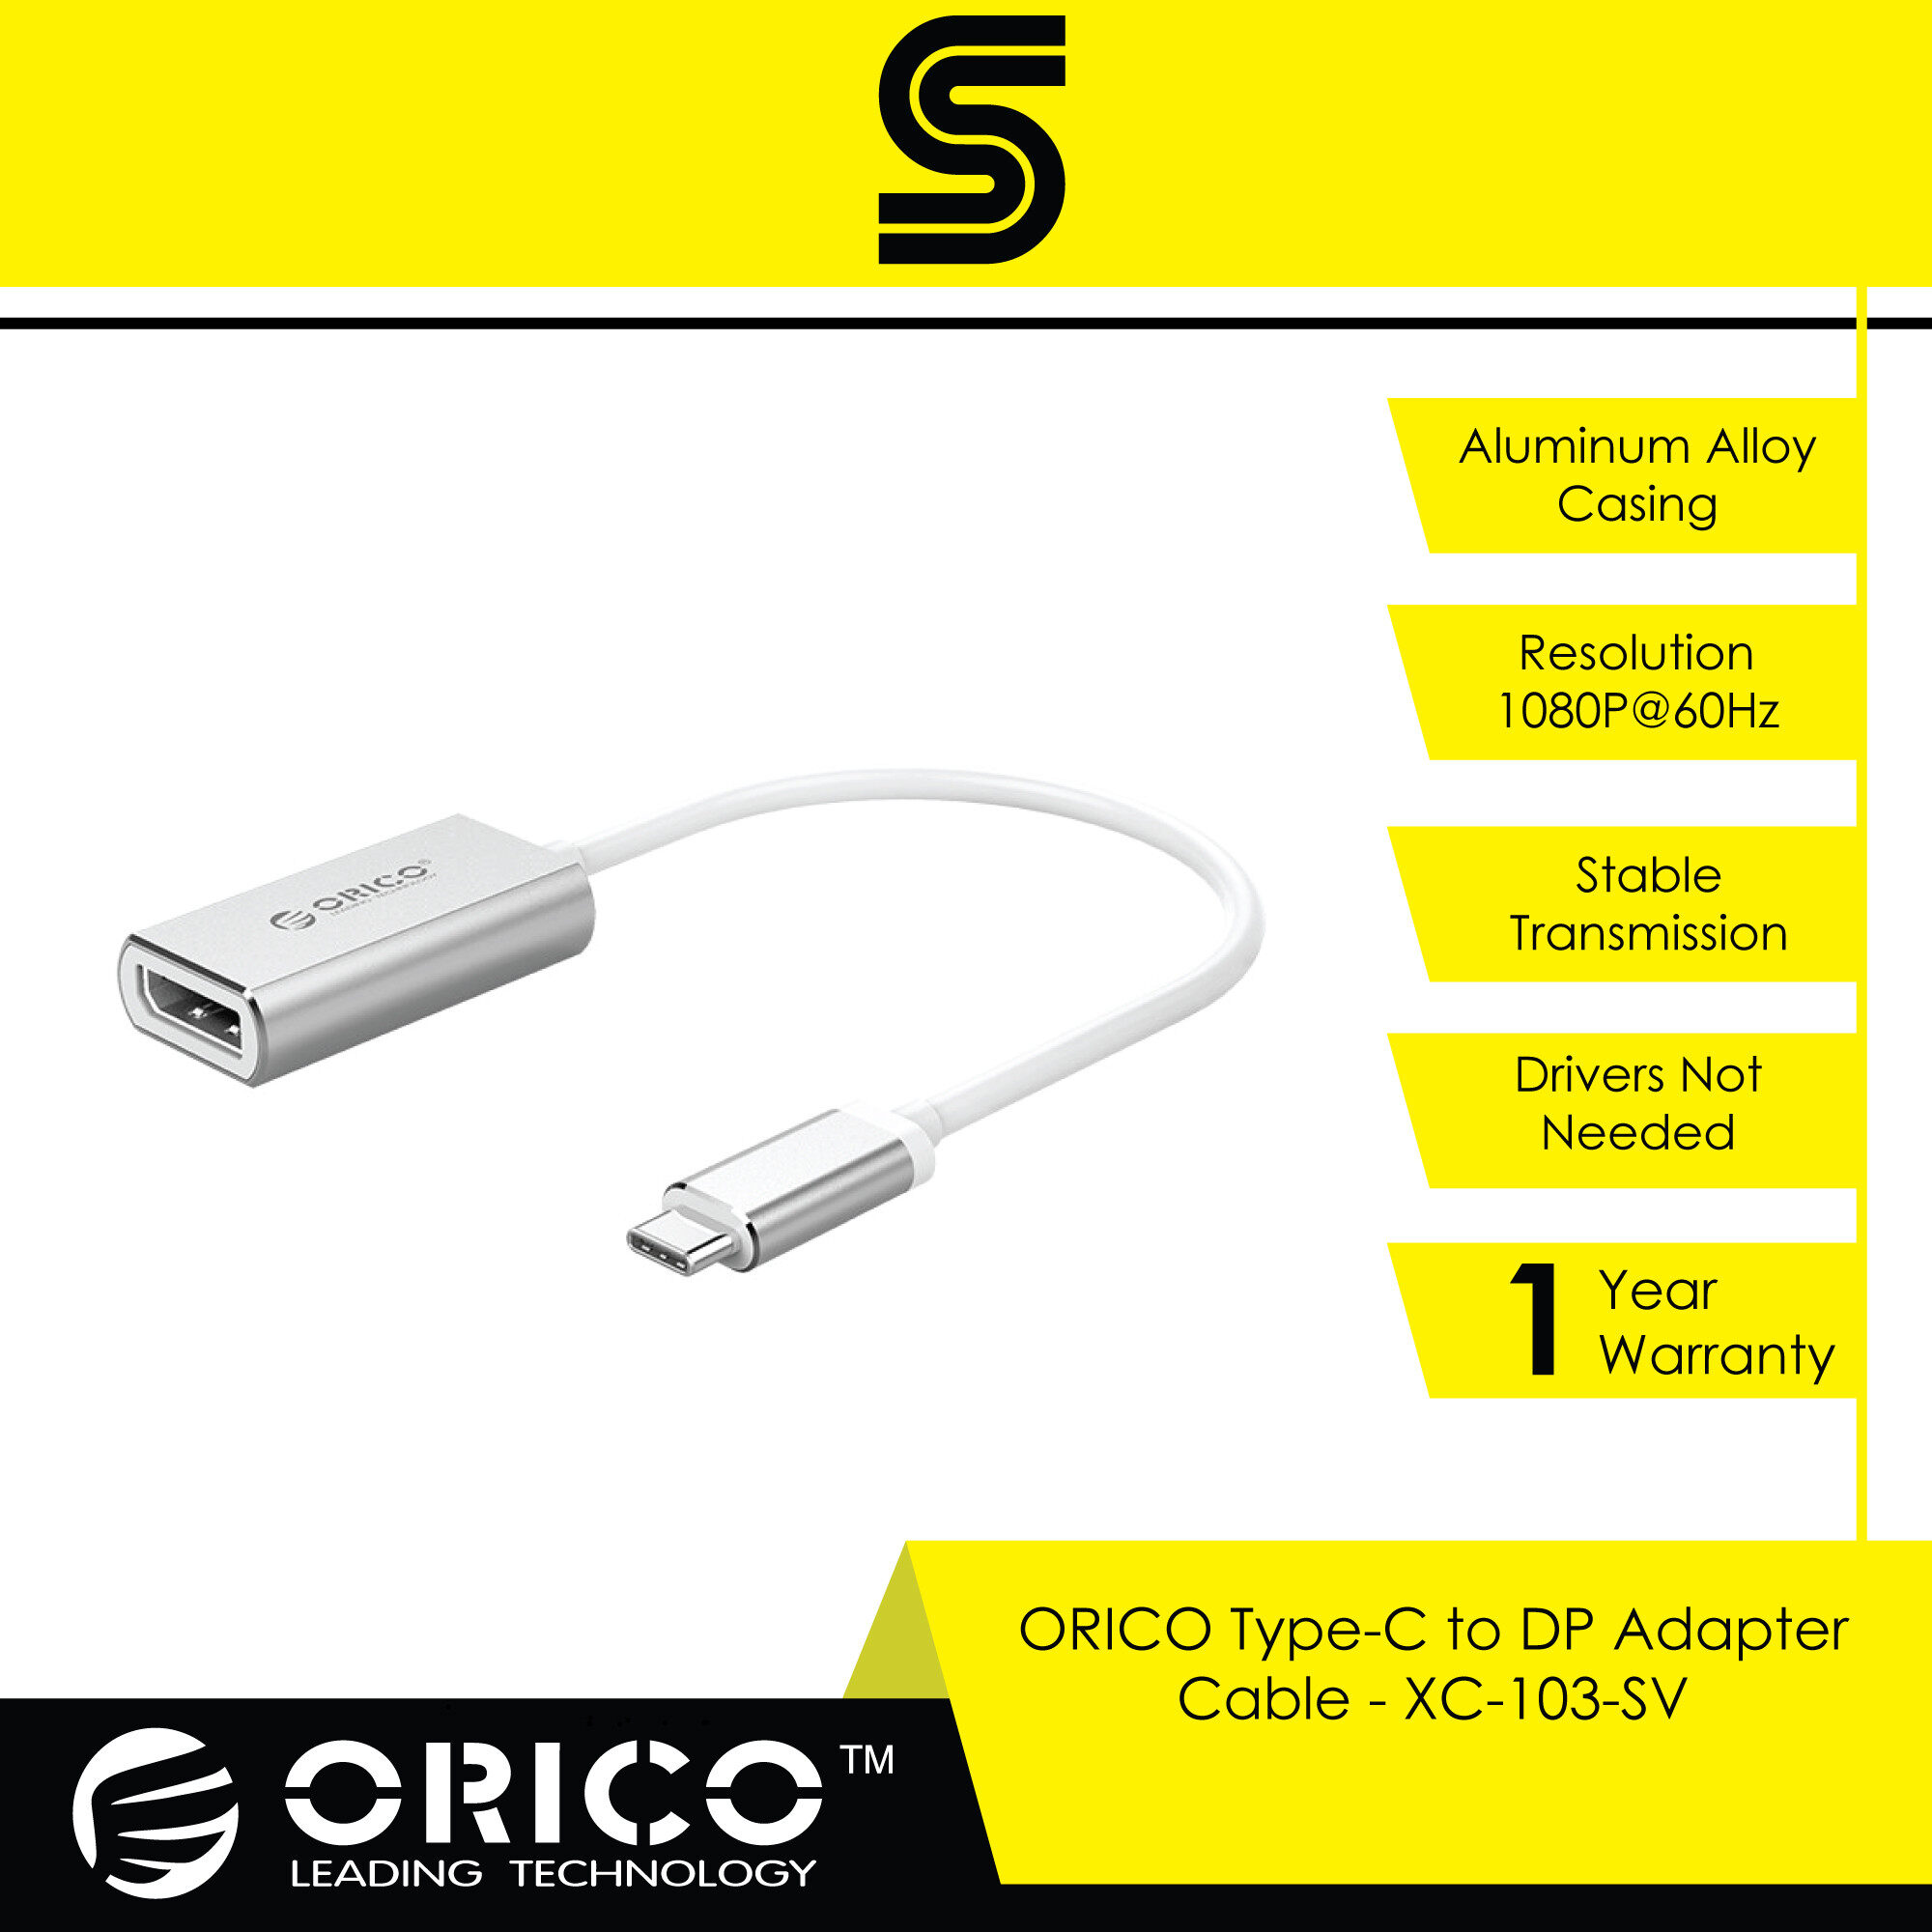 ORICO Type-C to DP Adapter Cable - XC-103-SV